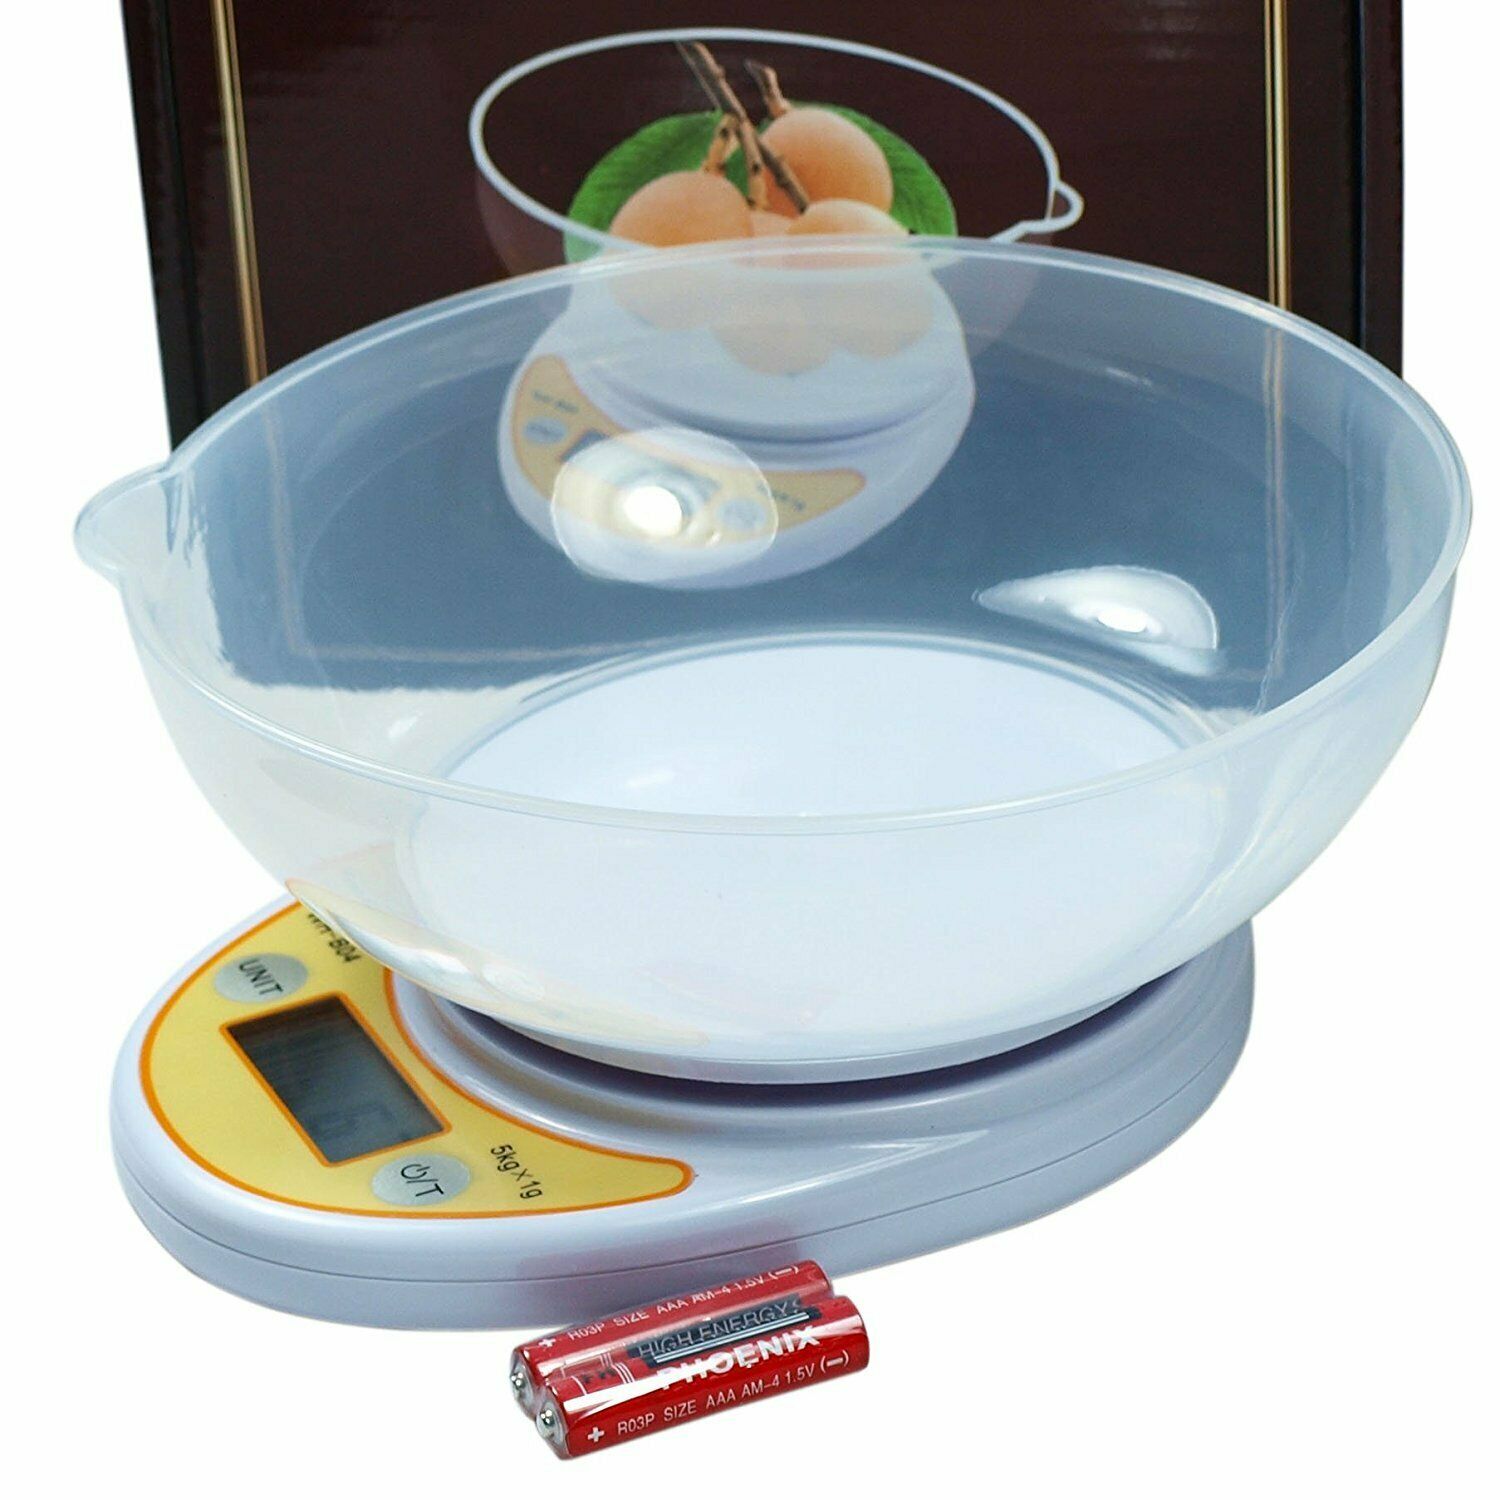 Multi Function Digital Kitchen Scale W Weighing Bowl For Food Kitchen 11lb 5kg 312519845873.JPG